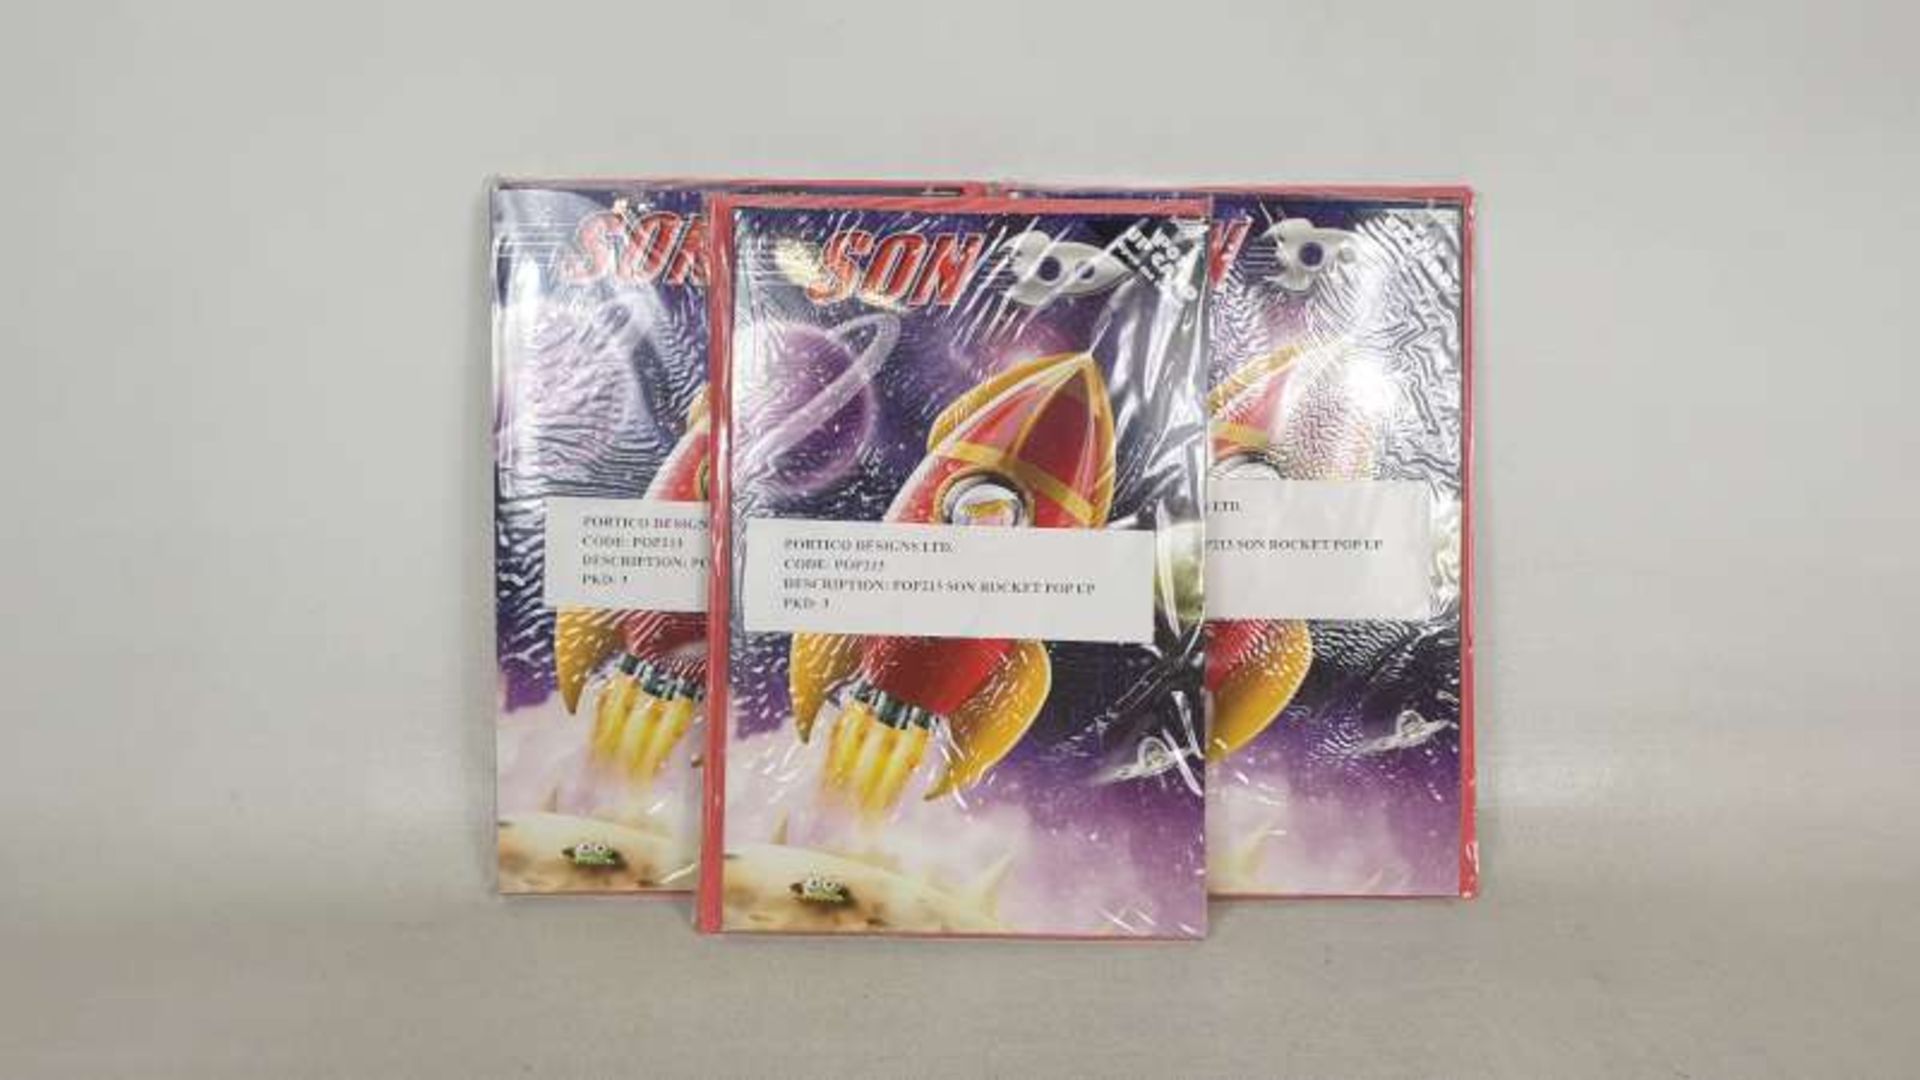 96 X PACKS OF BRAND NEW POP UP ROCKET SON BIRTHDAY CARDS WITH ENVELOPES